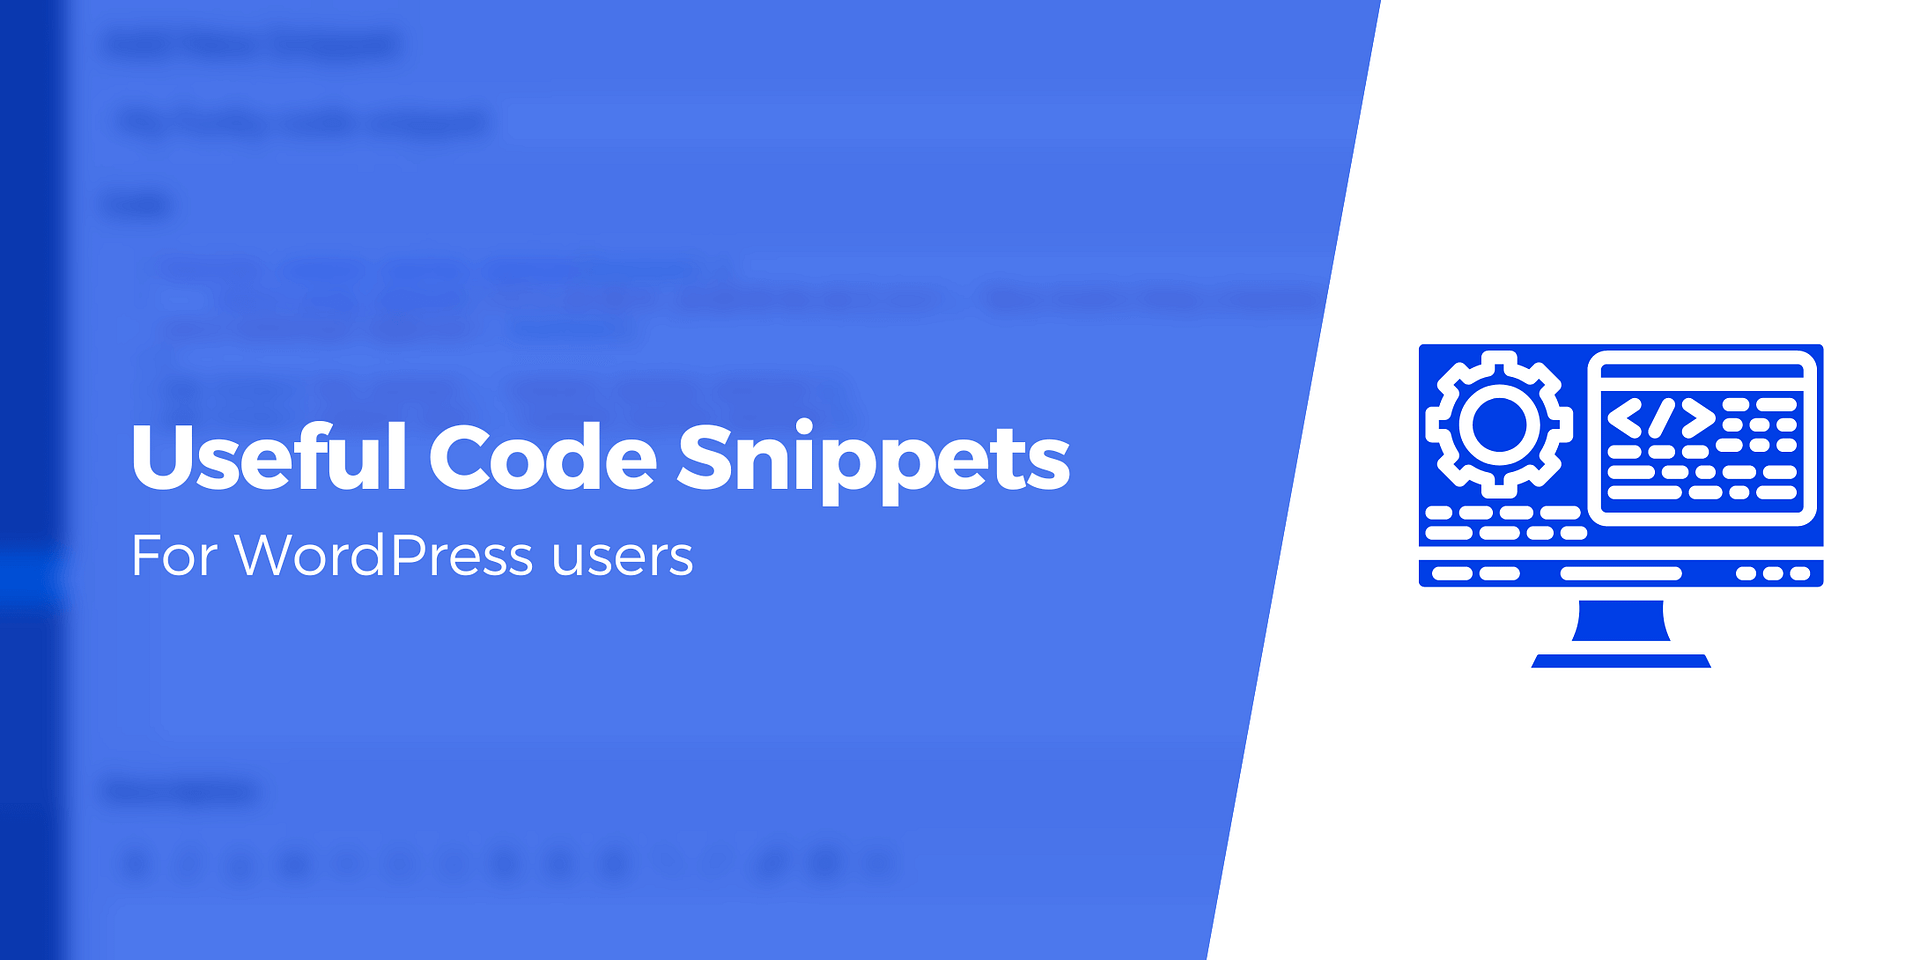 10-useful-code-snippets-for-wordpress-users